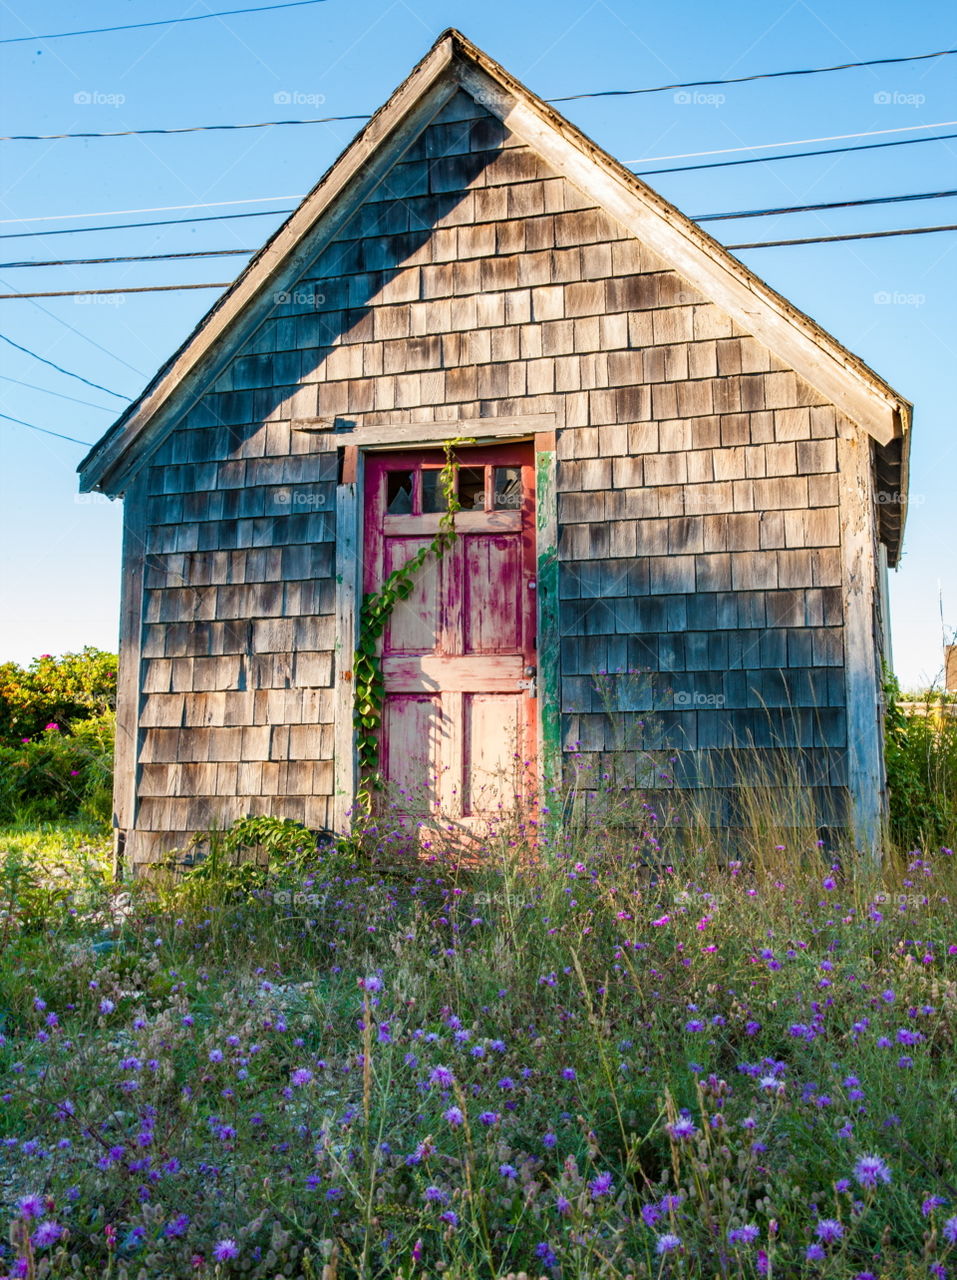 Flowers in front of abandoned shack 